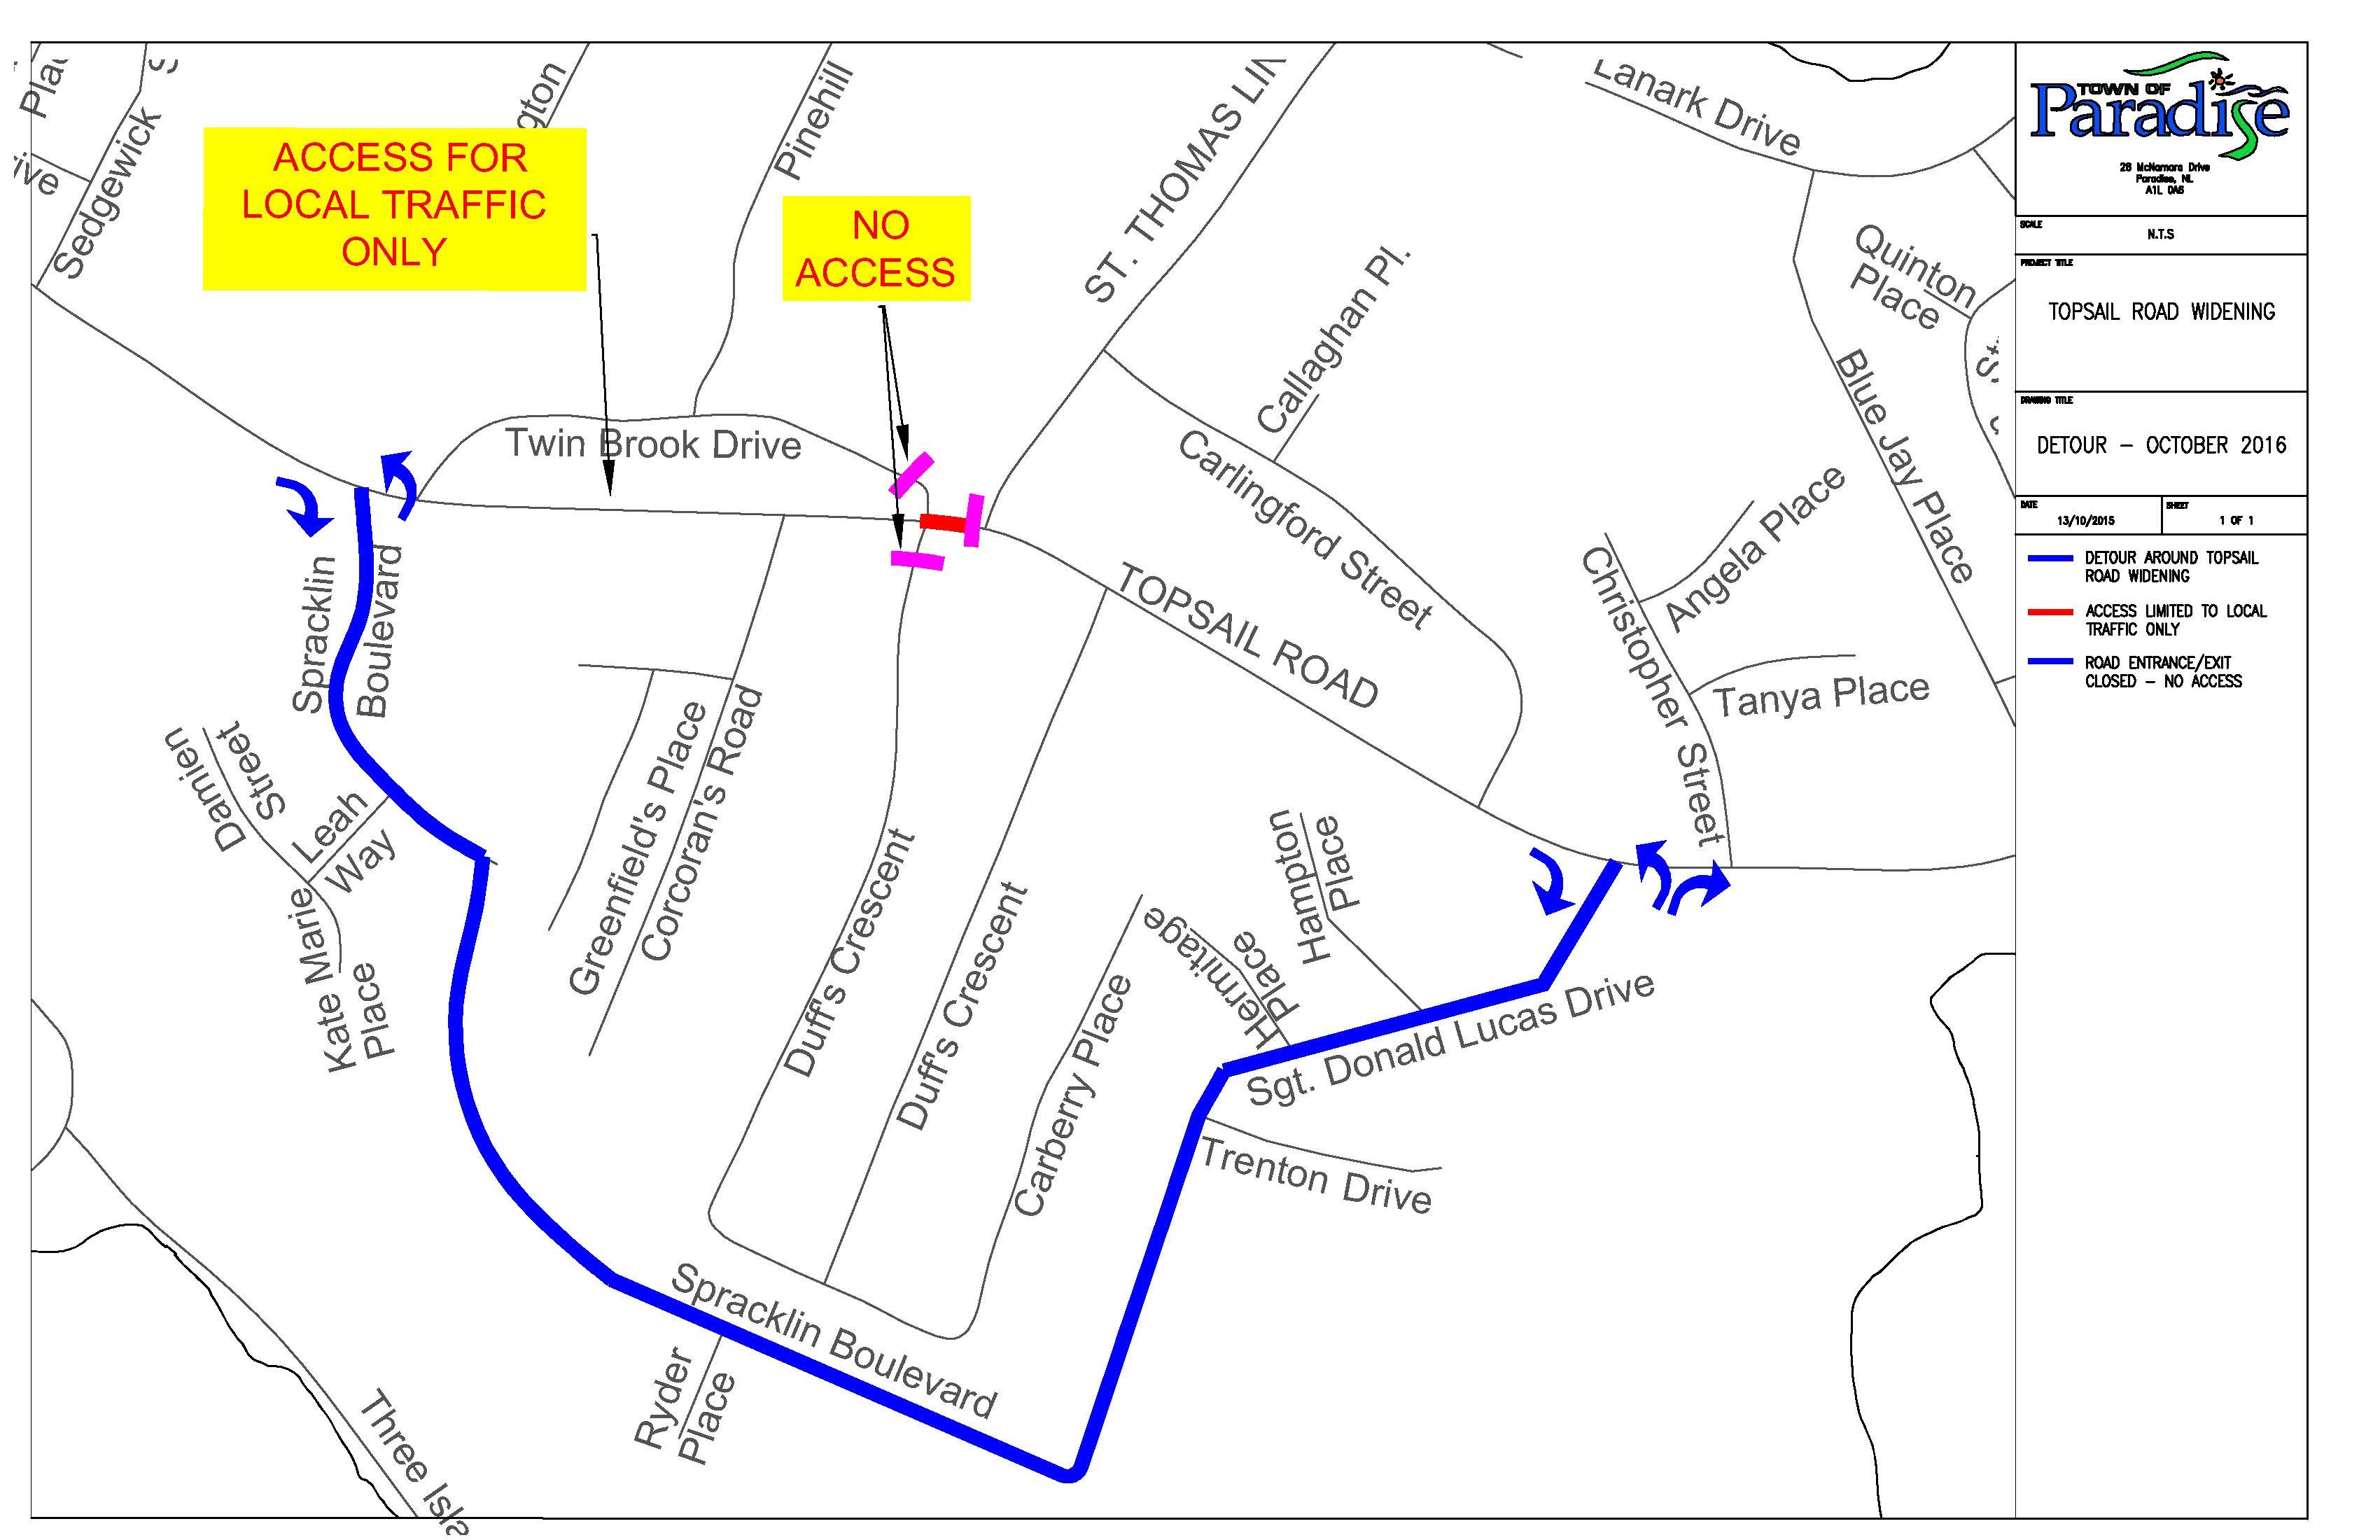 Detour for Topsail Road